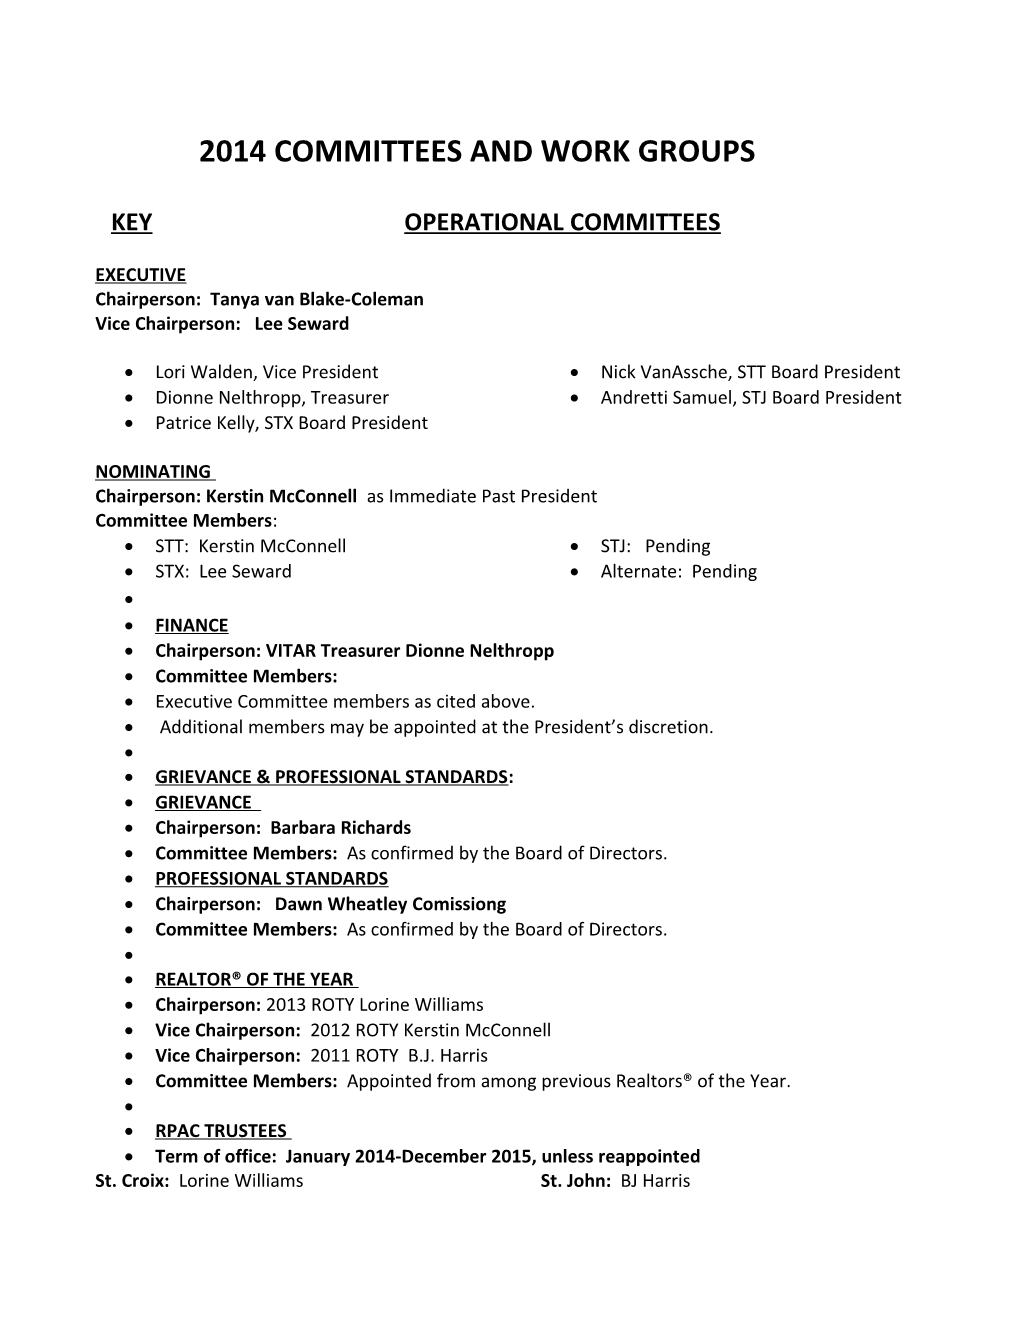 VITAR COMMITTEES and Their SUB COMMITTEES